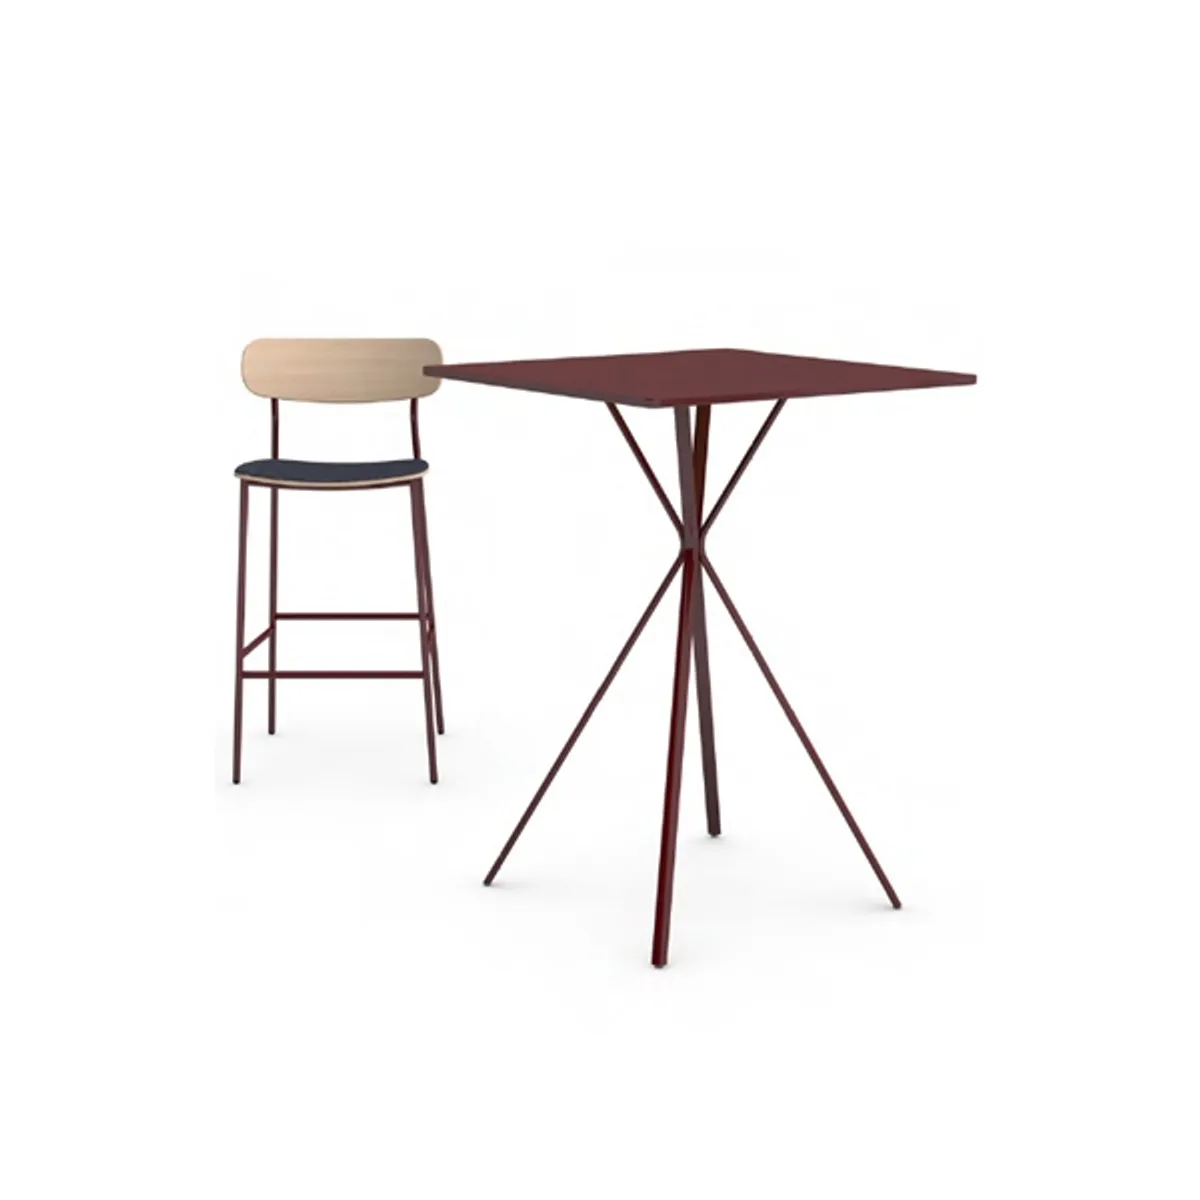 Carola square table Inside Out Contracts3